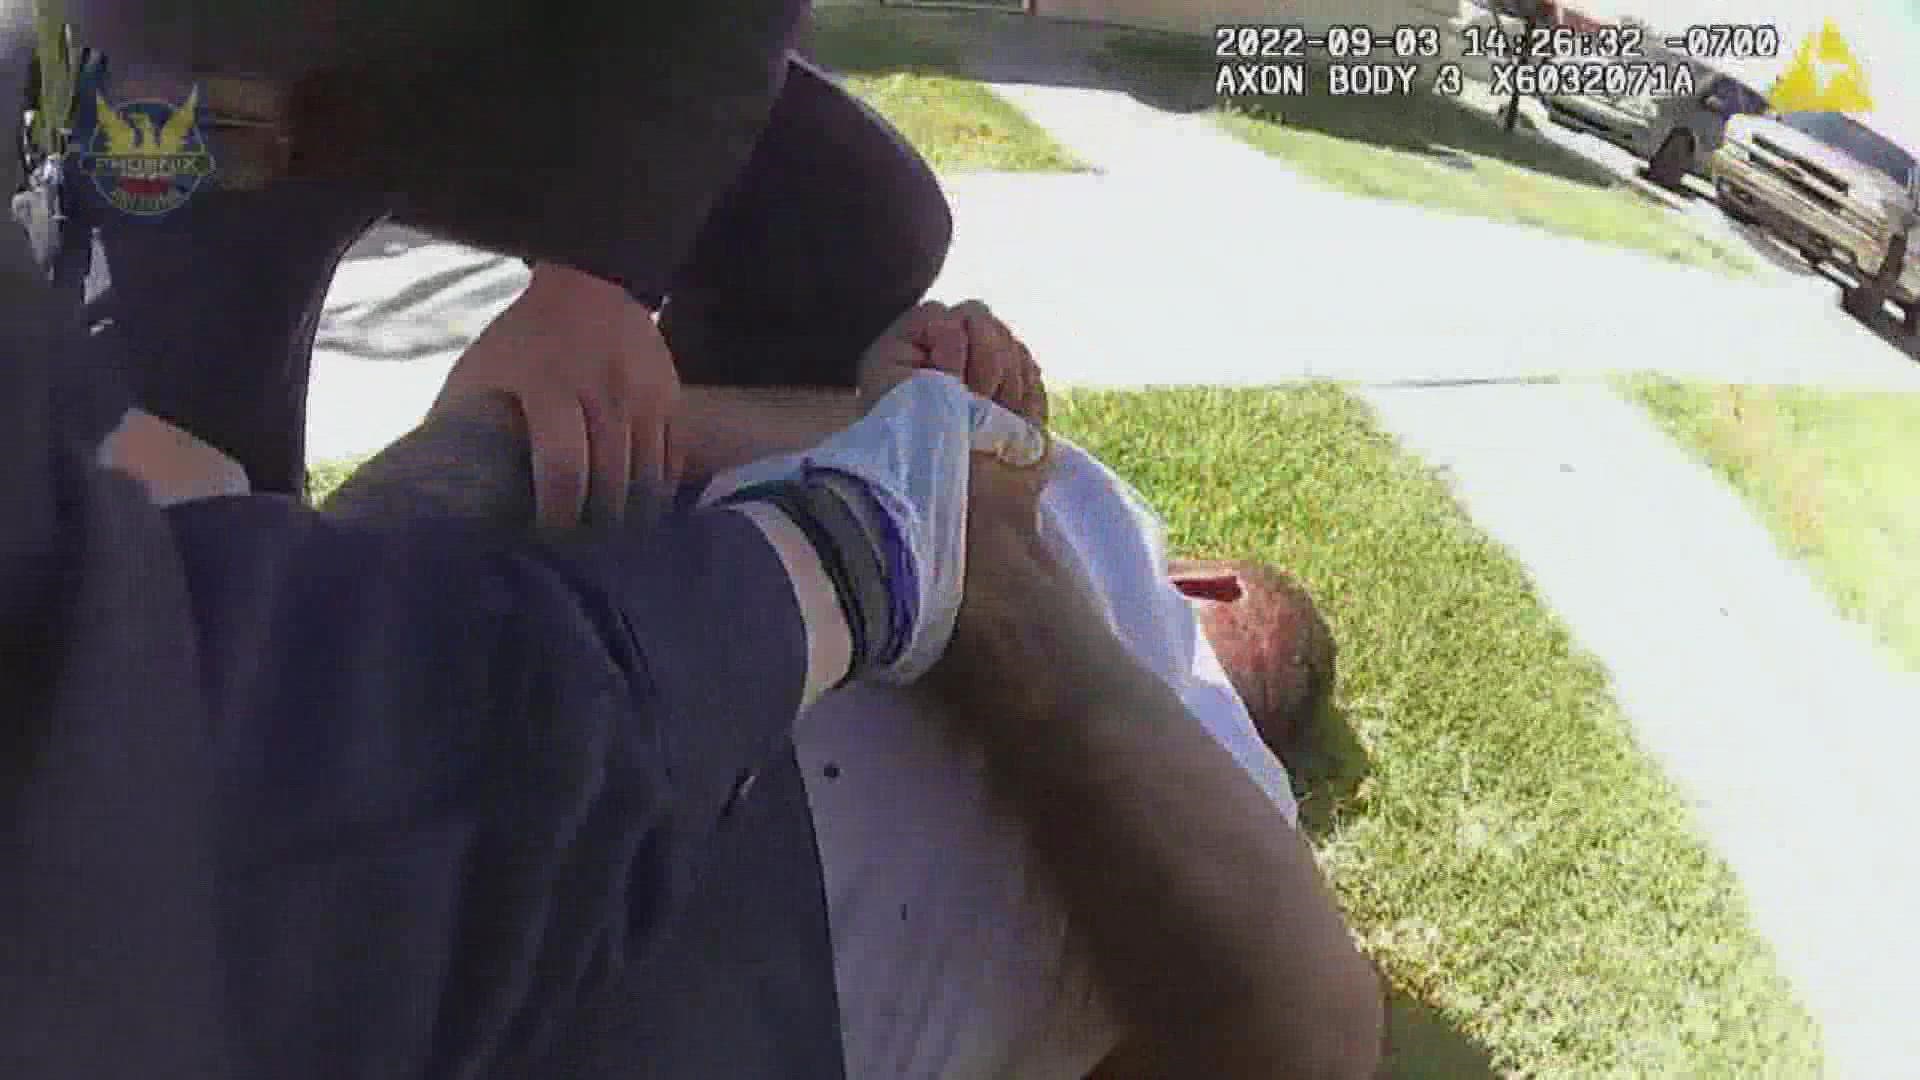 The footage shows the moments leading up to a death of a man in Phoenix police custody earlier this month.